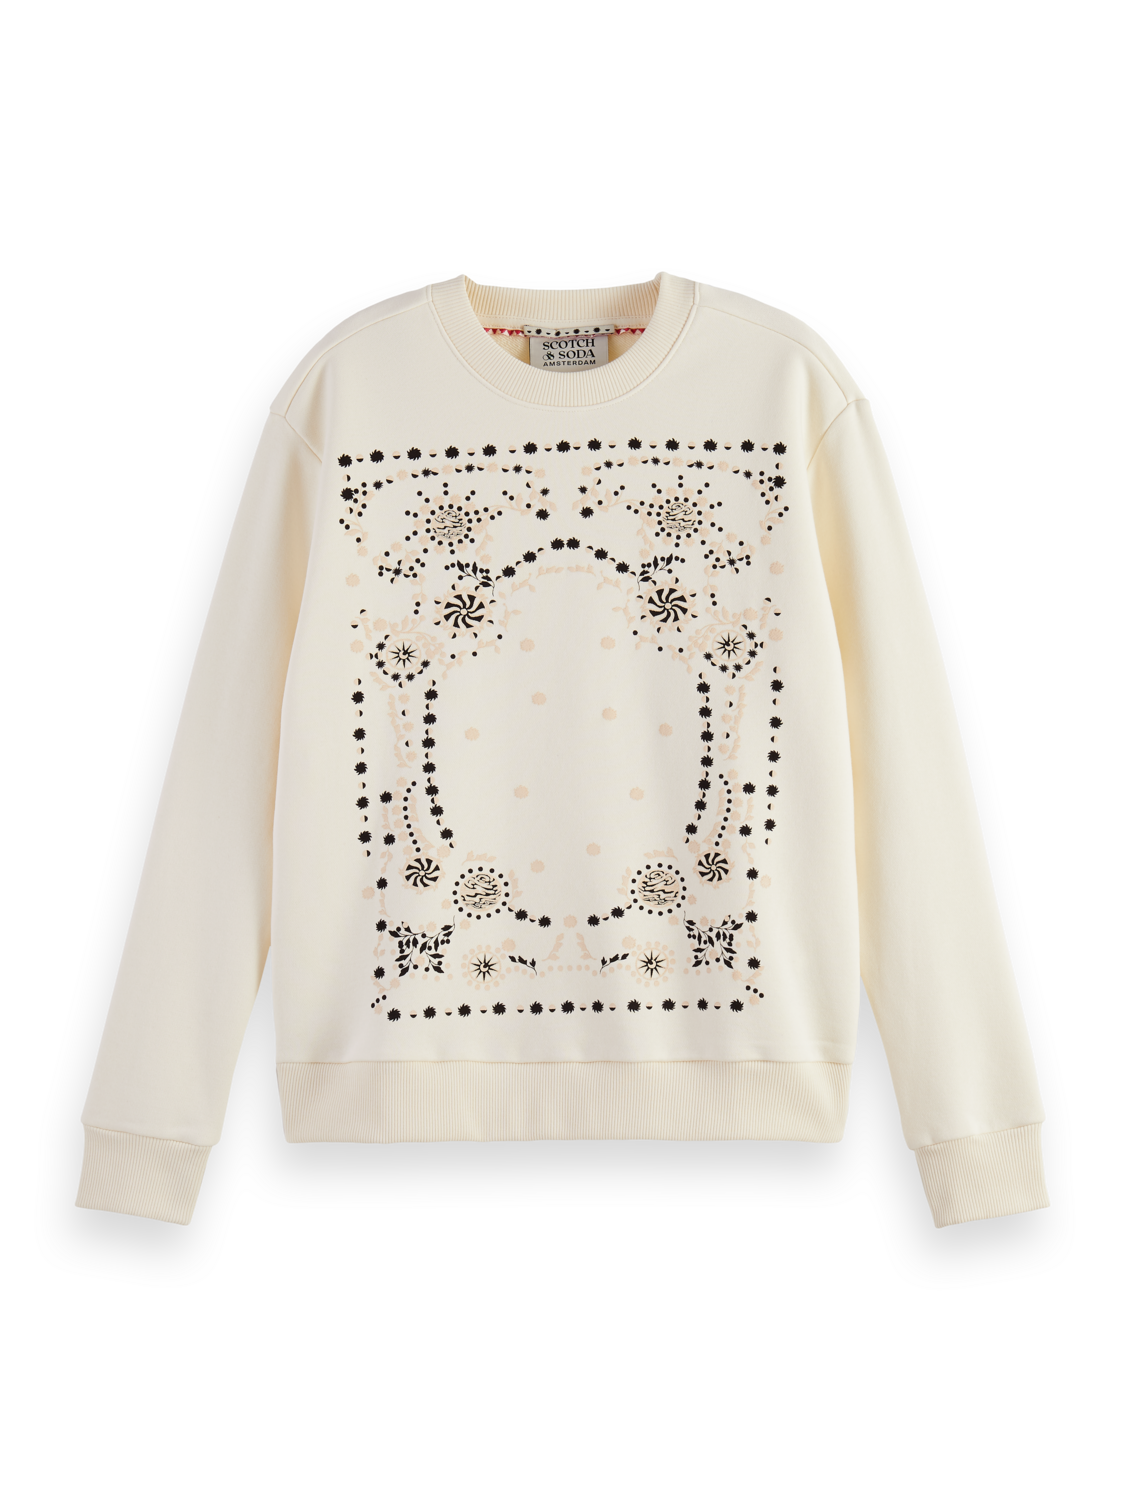 Scotch & Soda Relaxed Fit Crew Sweater